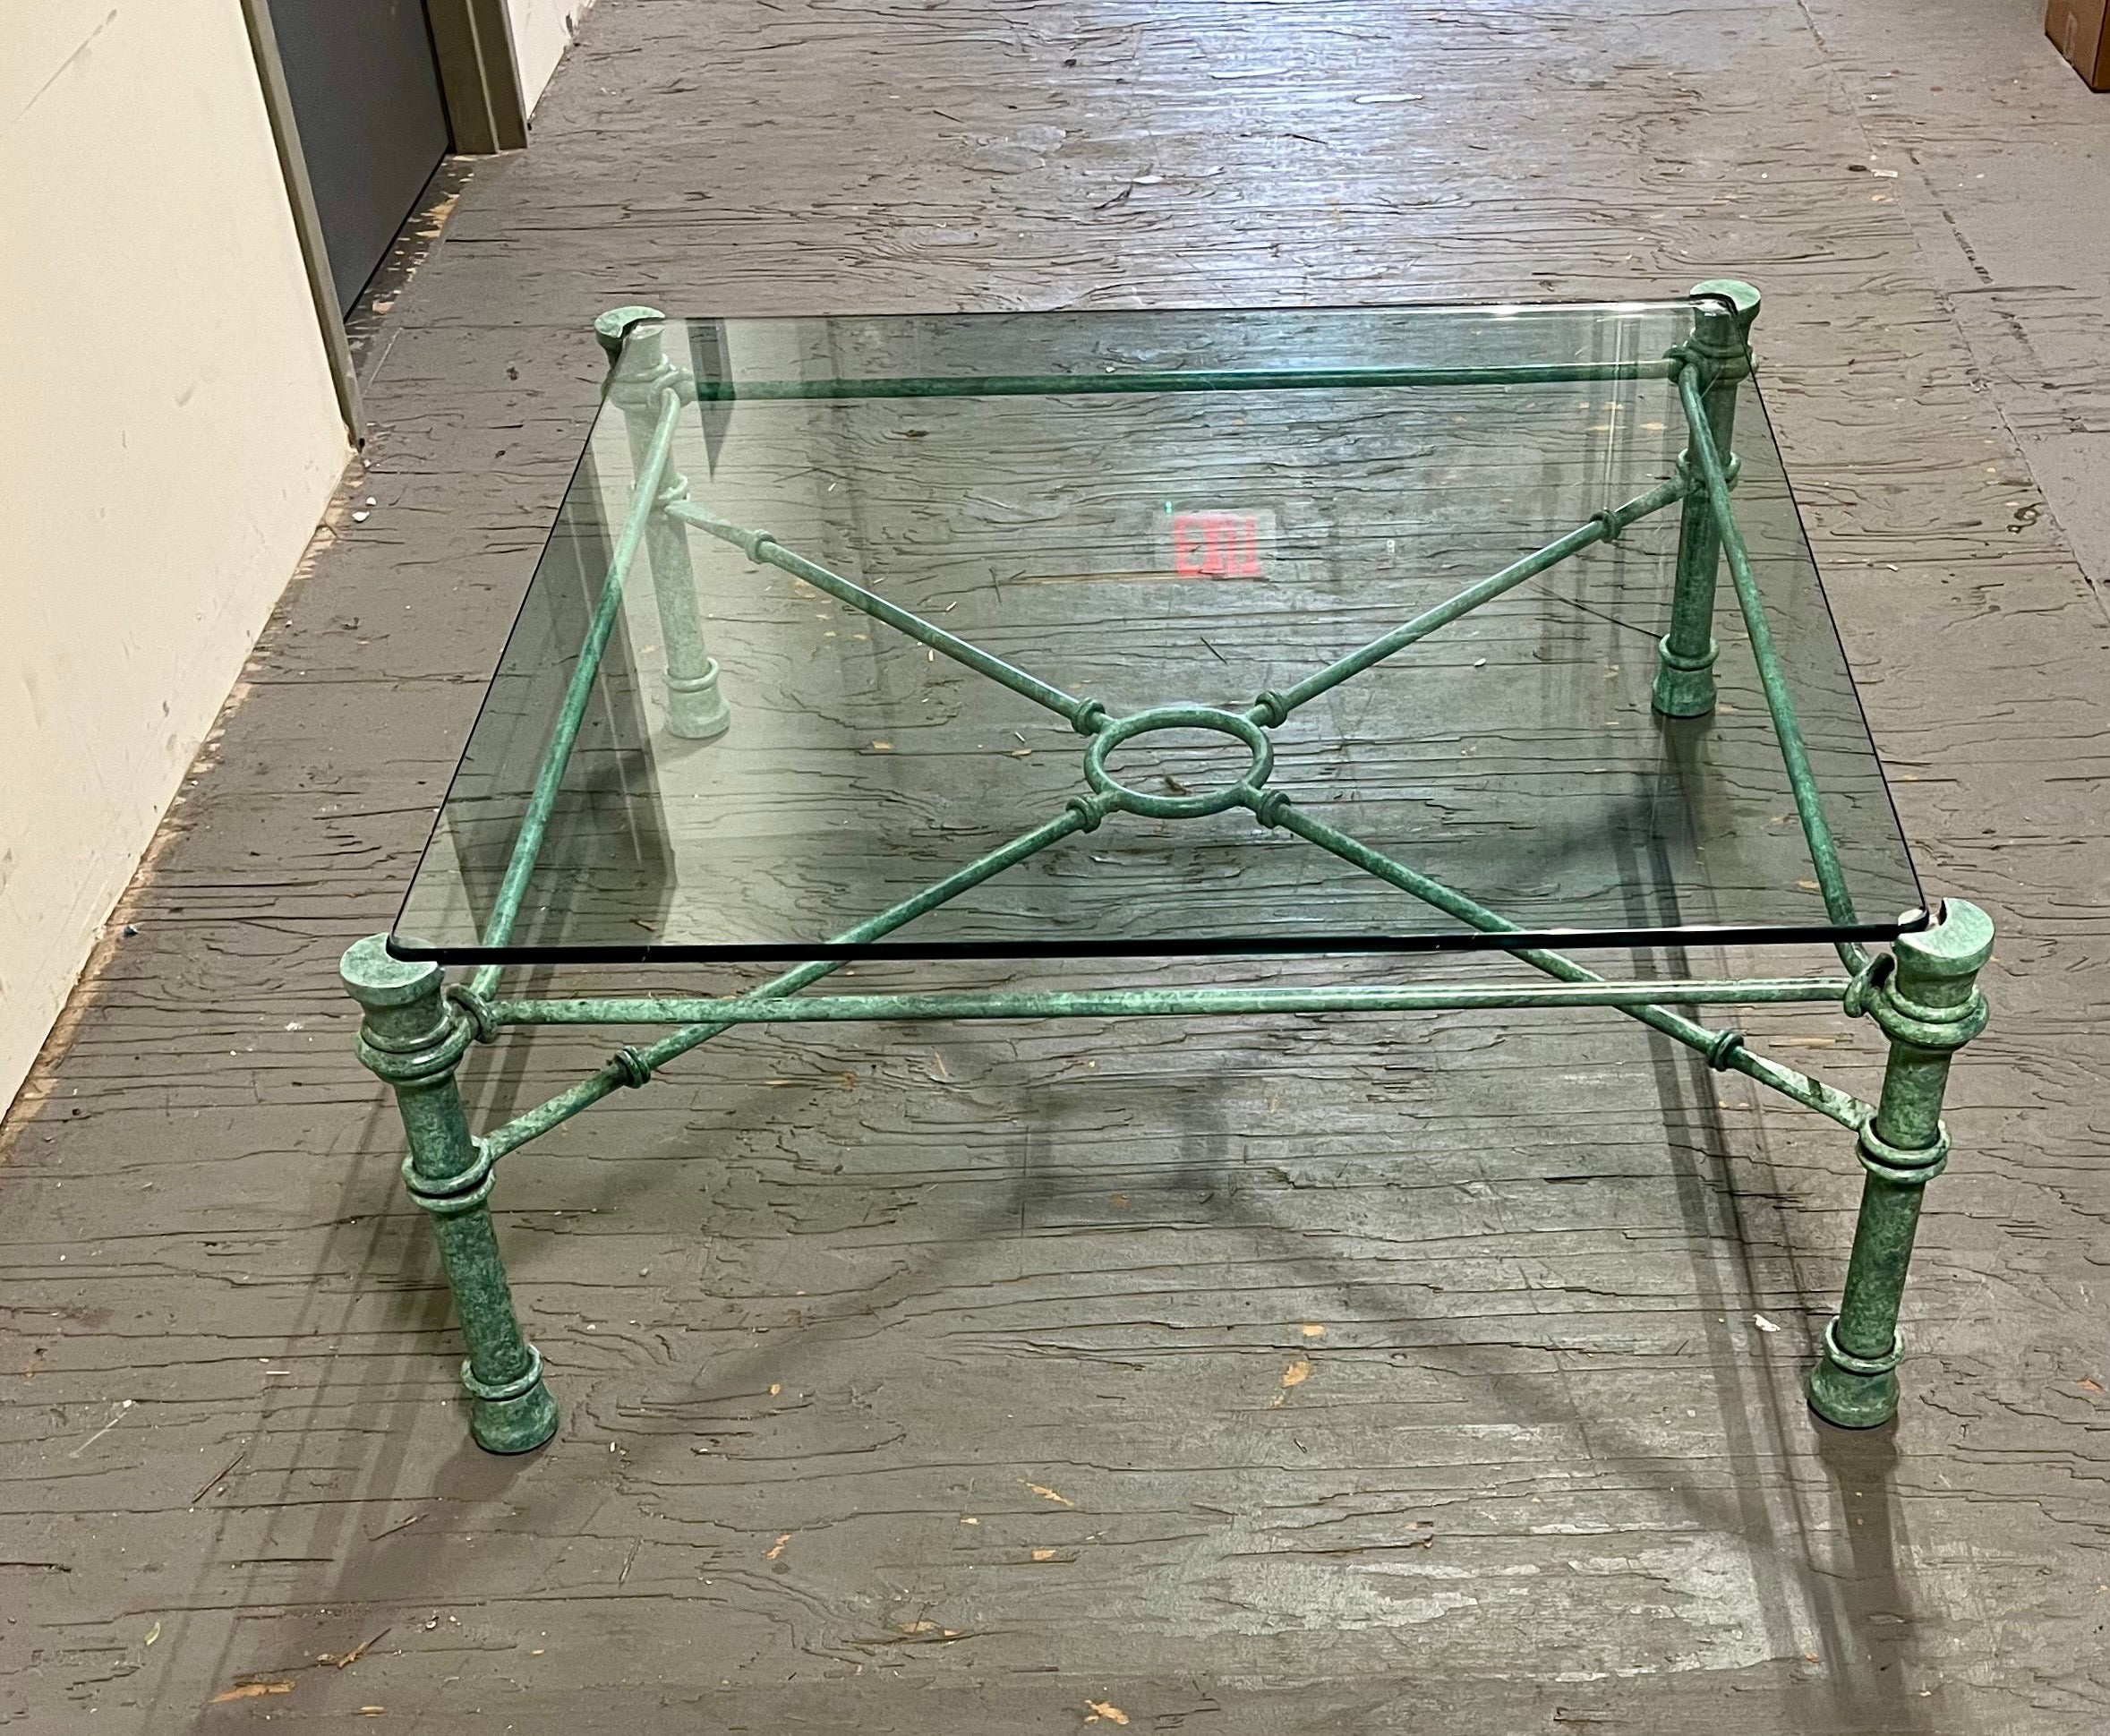 Classic Giacometti style large patinated bronze verdigris wrought-iron welded steel base. Water rounded edge glass inset top. Wonderful depth in detailing. 
Curbside to NYC/Philly $350